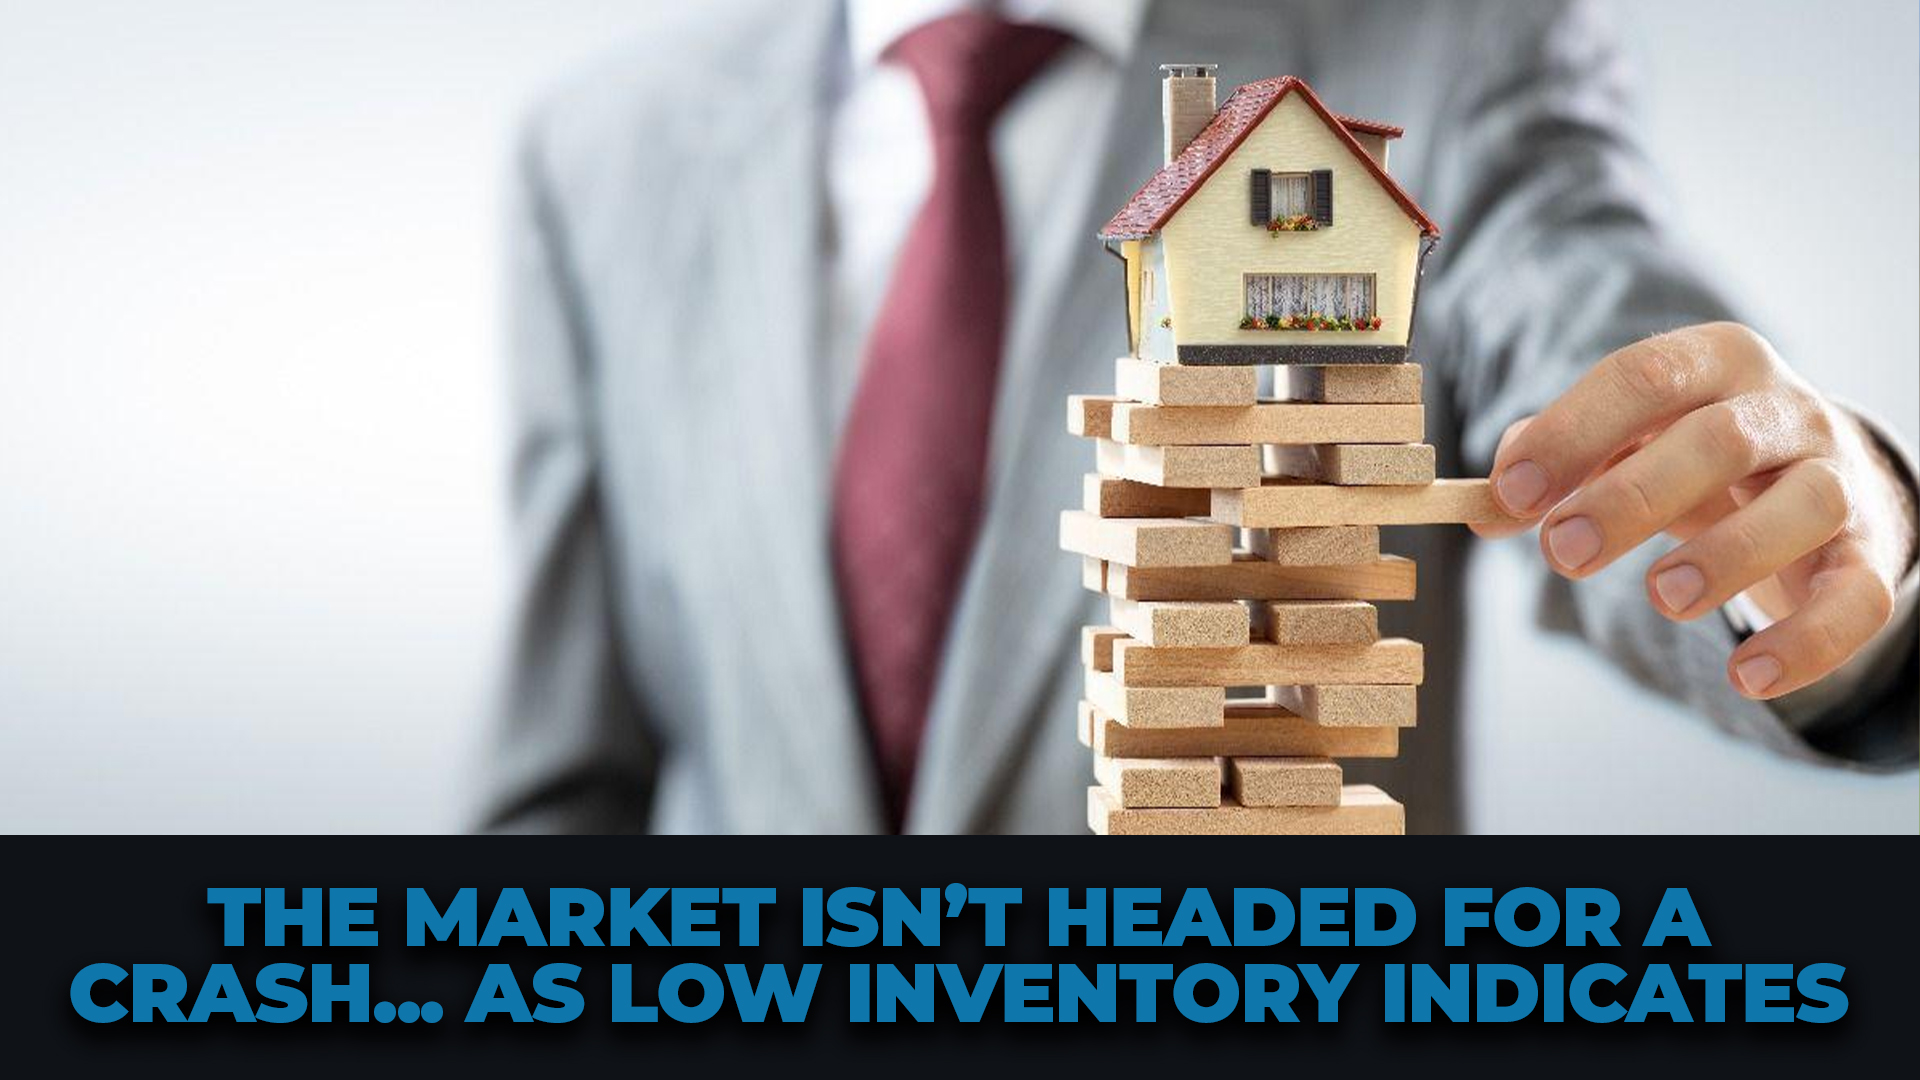 The Market Isn’t Headed for a Crash... as Low Inventory Indicates